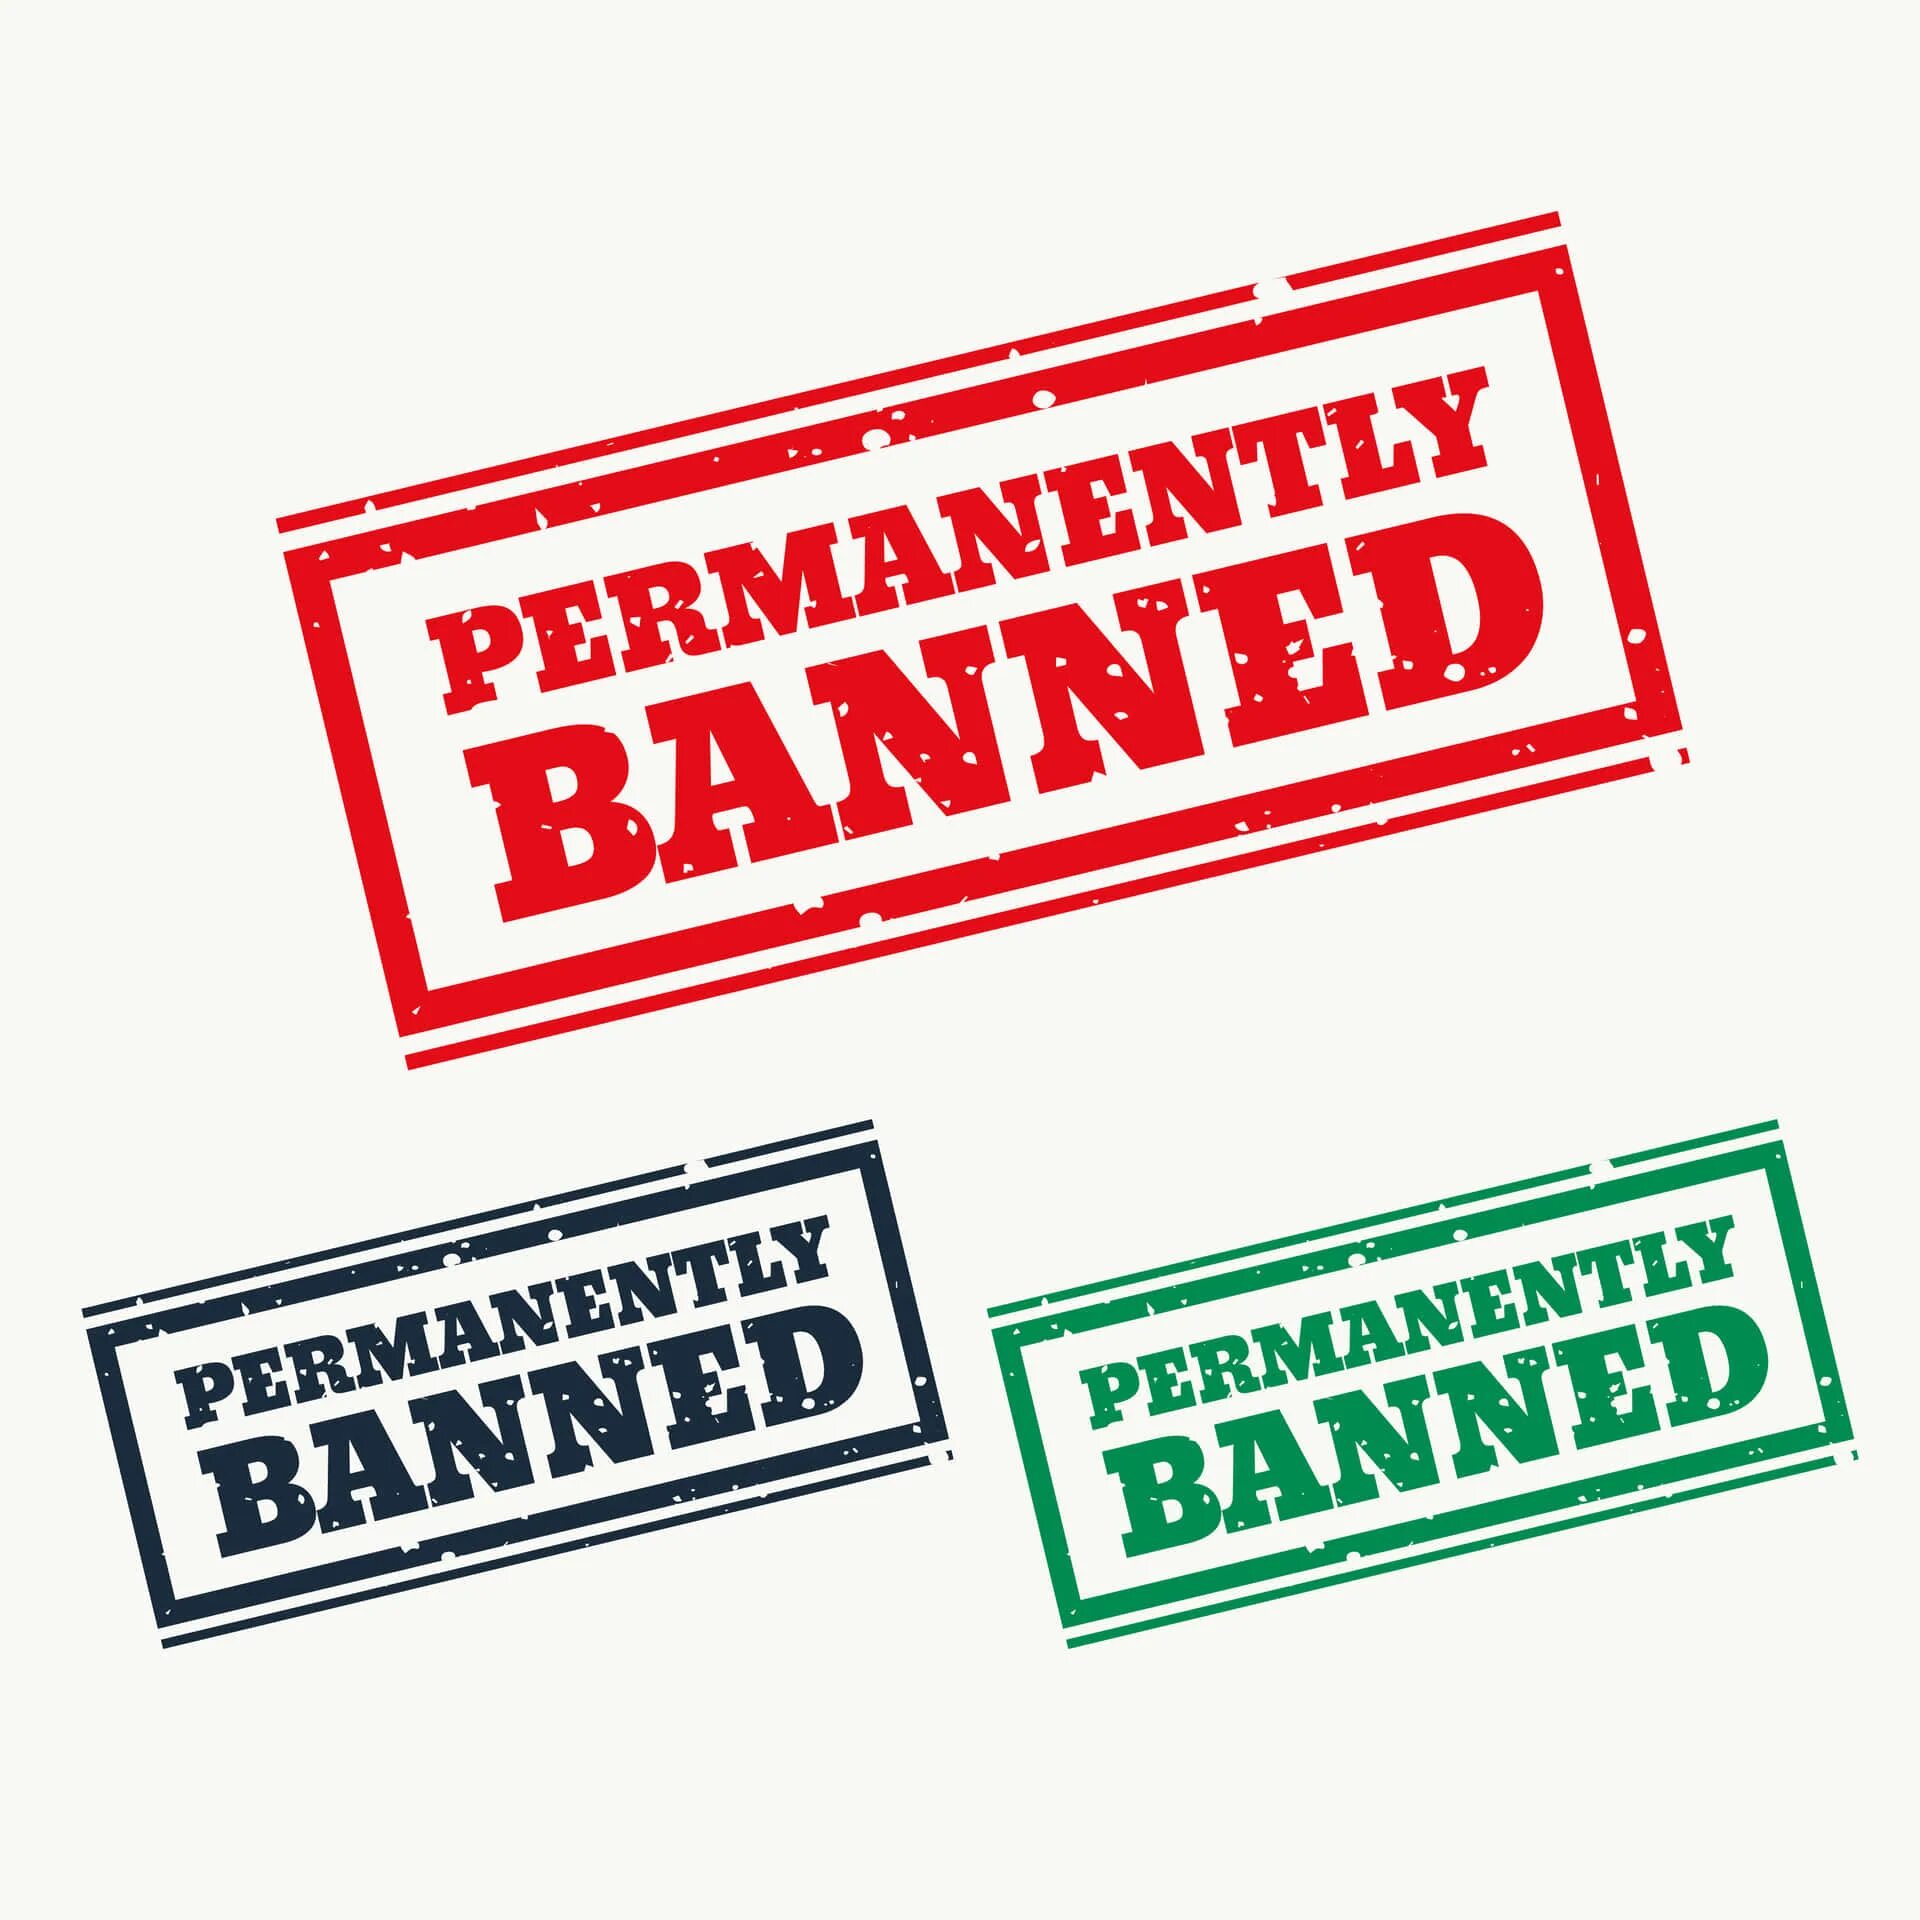 Permanently banned. Штамп запрещено. Banned штамп. Permanent ban.